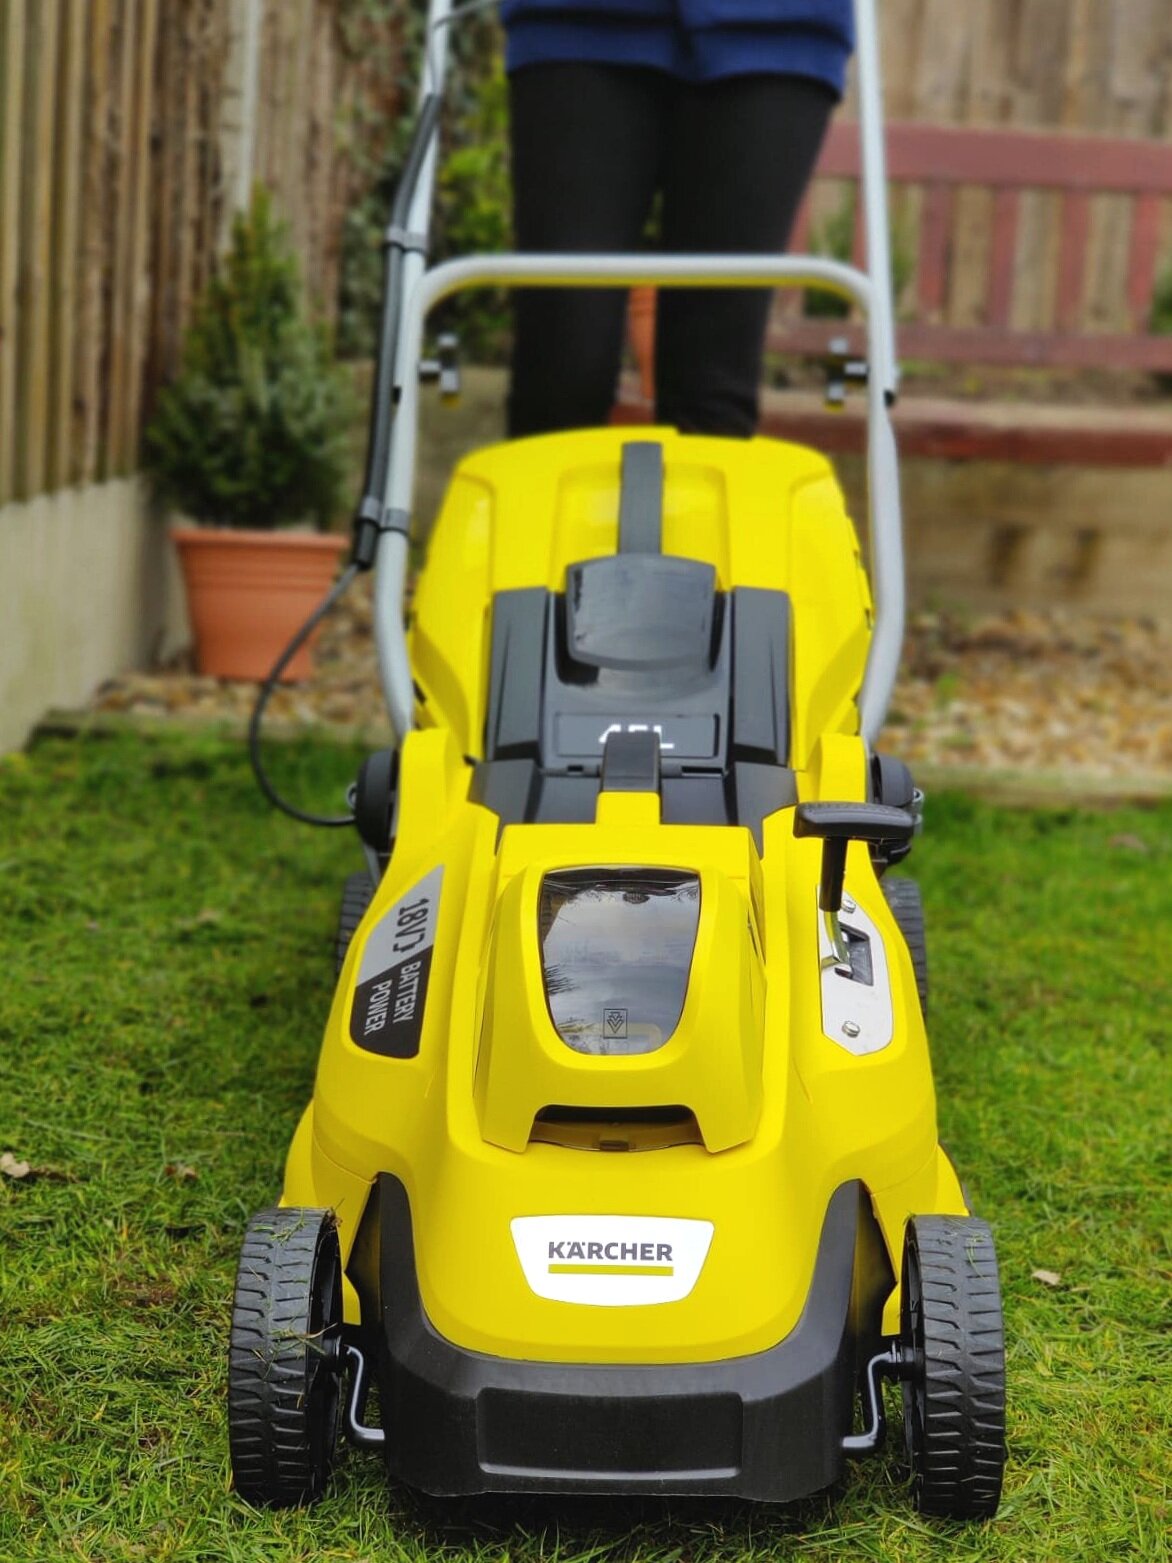 Karcher cordless lawn mover review